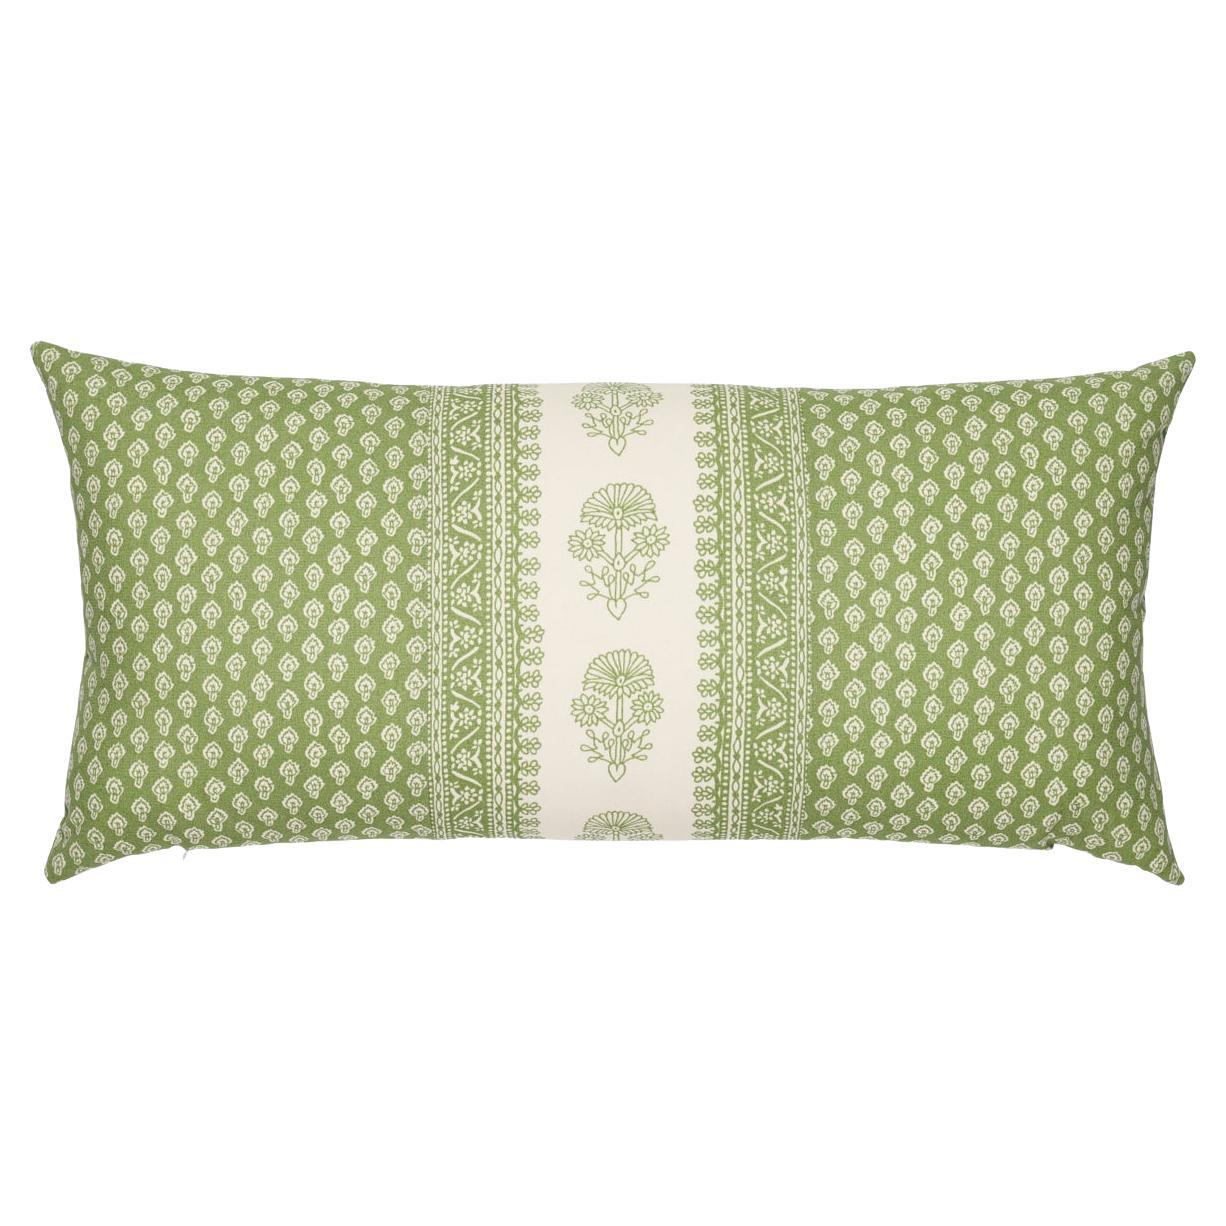 Schumacher Hyacinth I/O 30x14" Pillow in Leaf Green For Sale